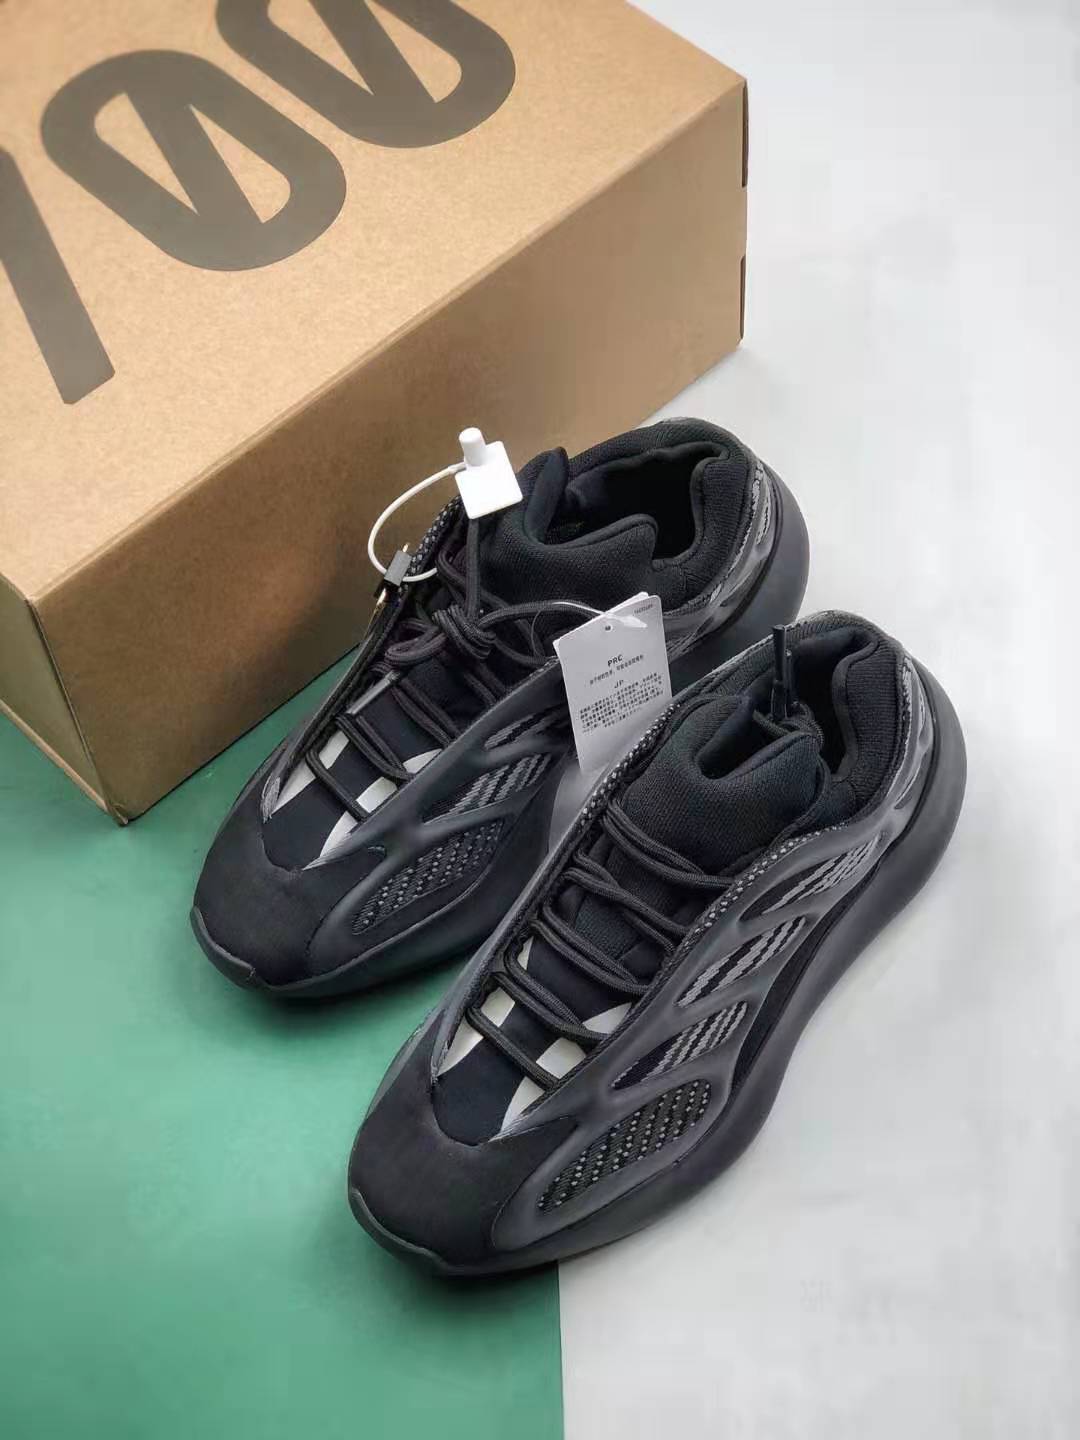 Adidas Yeezy 700 V3 Alvah H67799 | Shop the Latest Yeezy Drops